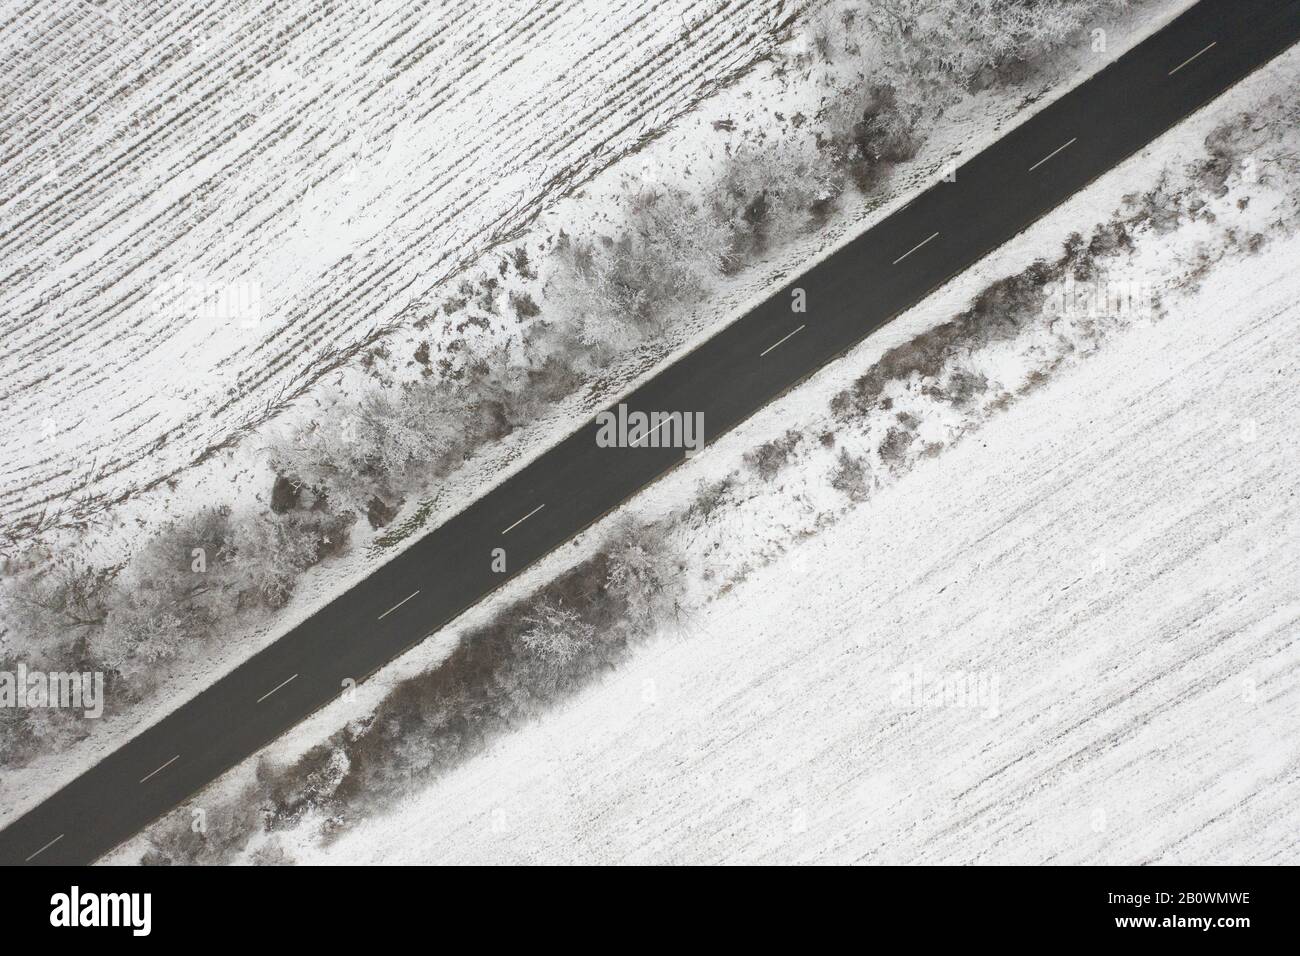 field, nature, land, agriculture, landscape, farm,snow, rural, plowed, agricultural, farmland, farming, season, soil, countryside, agronomy, country, Stock Photo